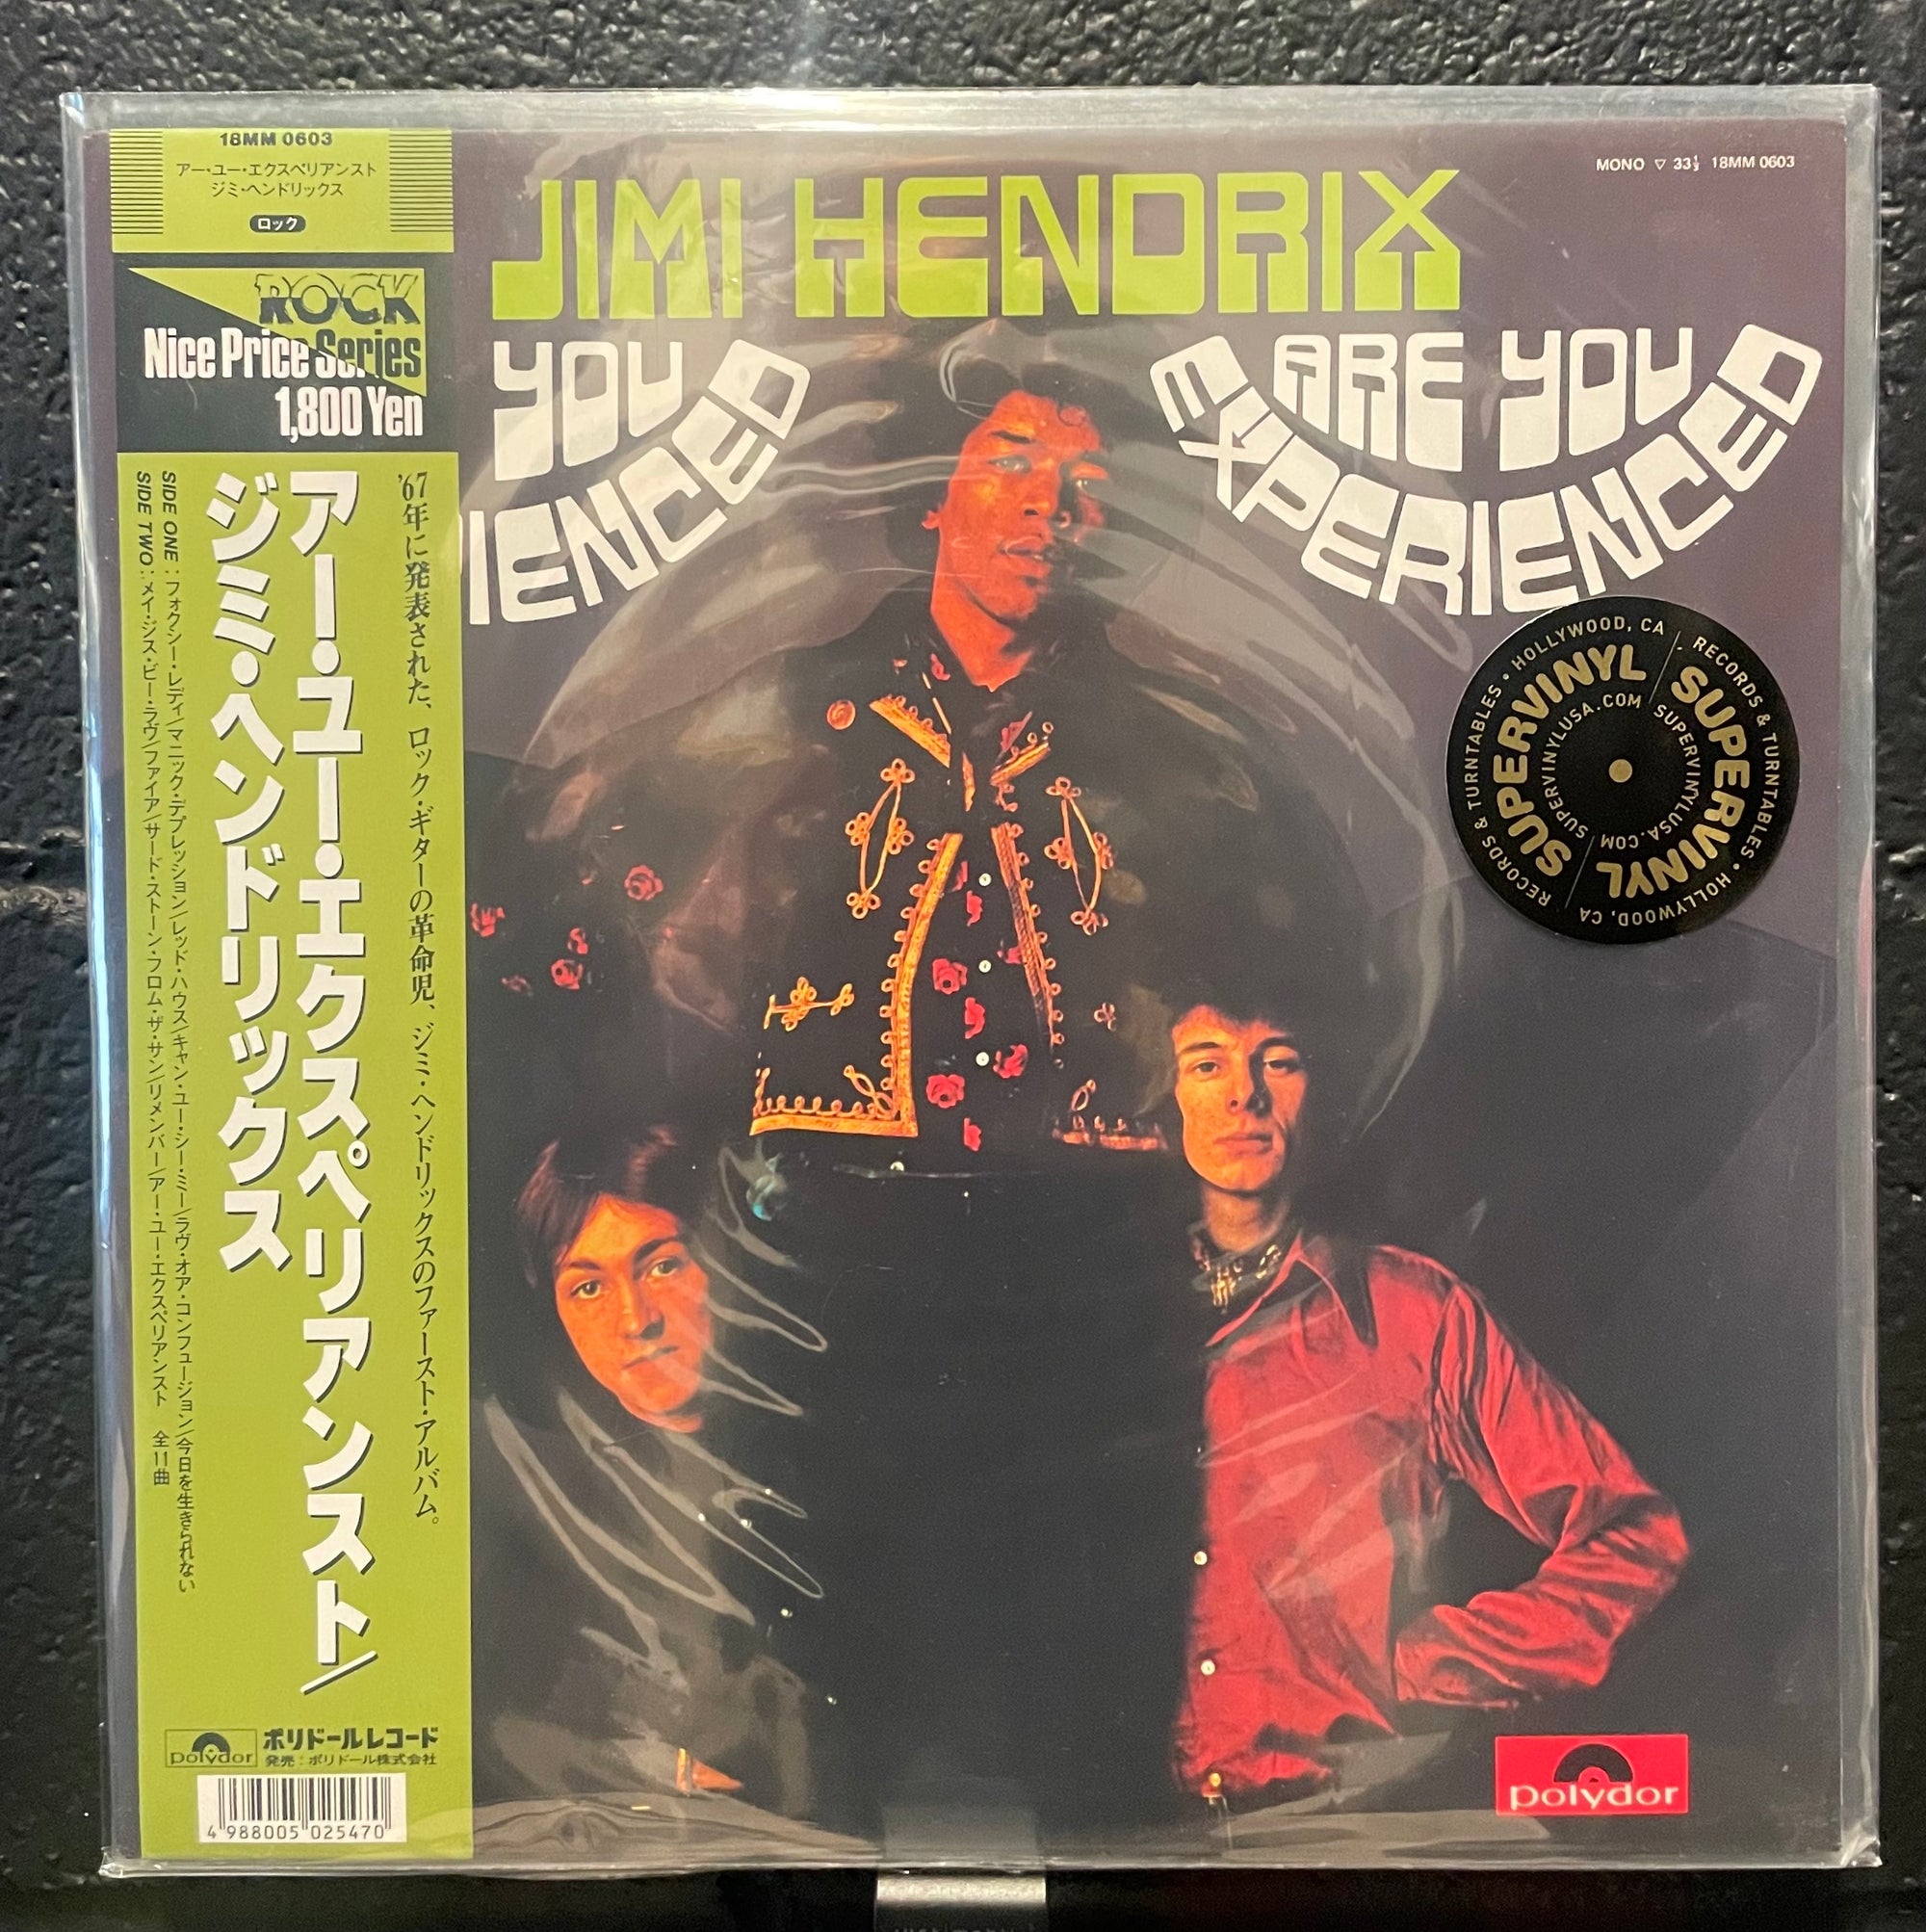 Are You Experienced? (Japan mono LP with obi)